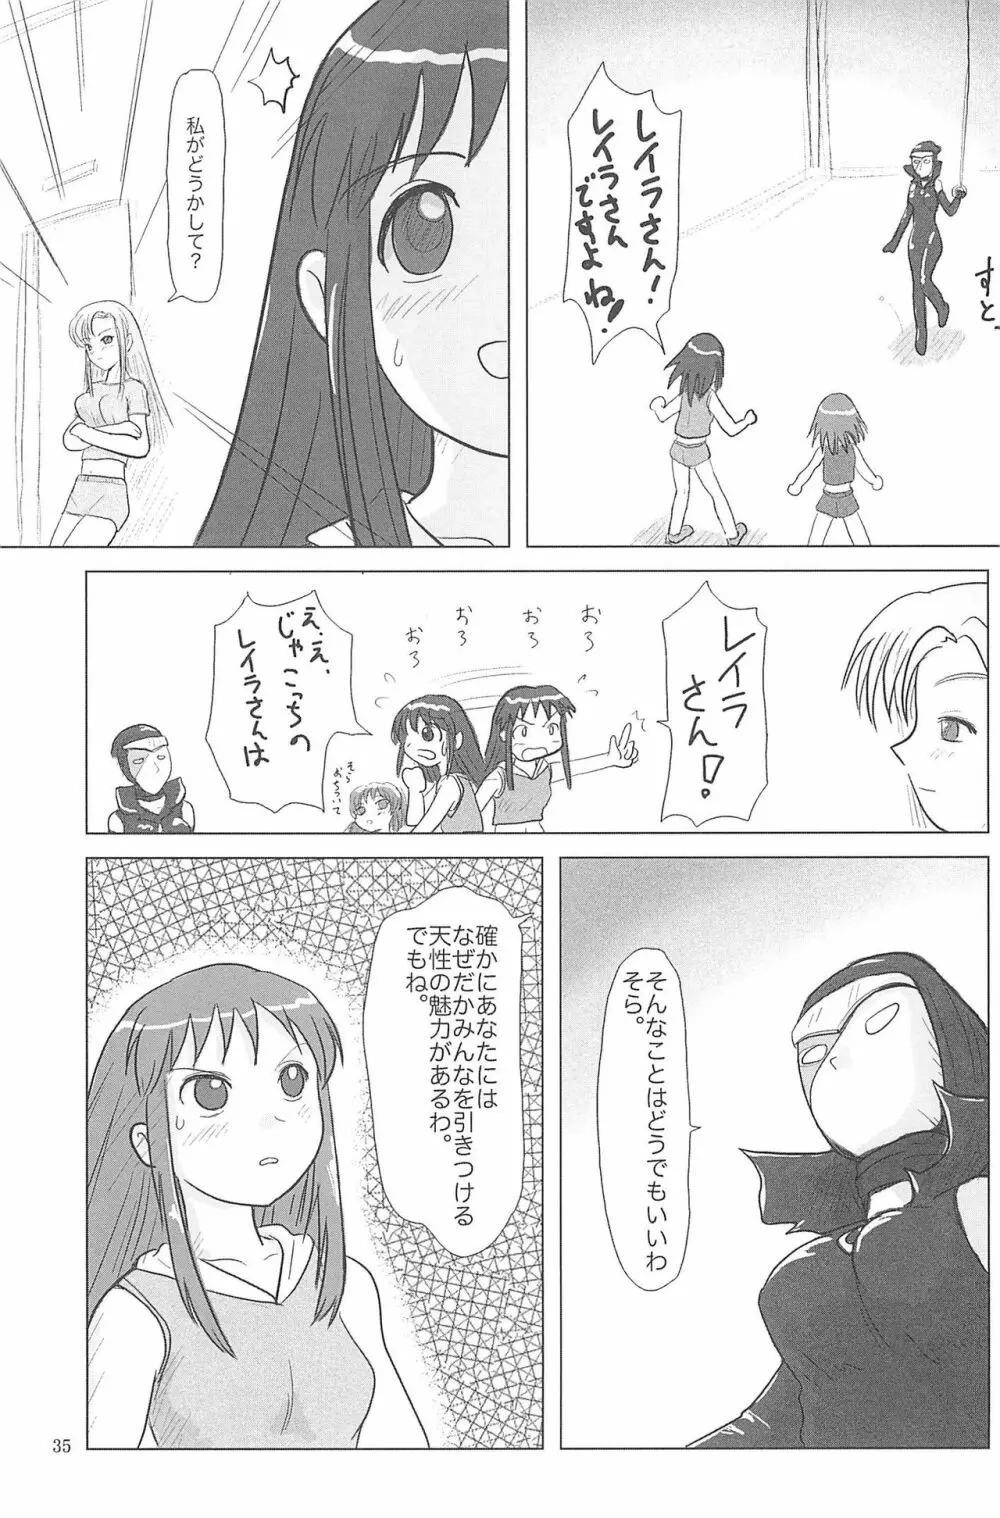 ND-special Volume 5 Page.35